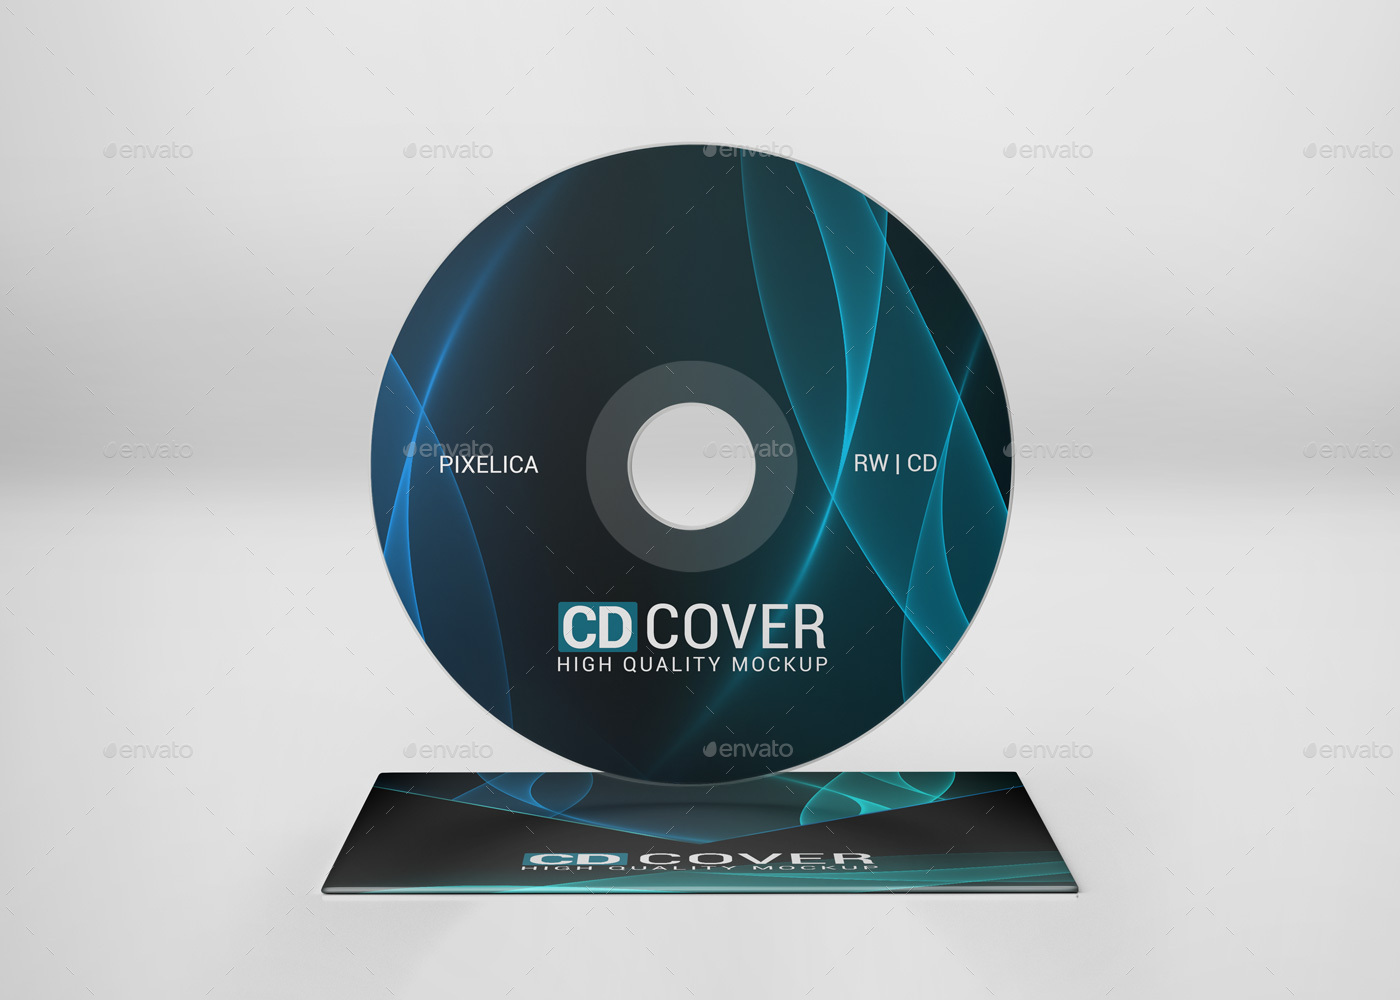 Download CD Cover Mockup by Pixelica21 | GraphicRiver